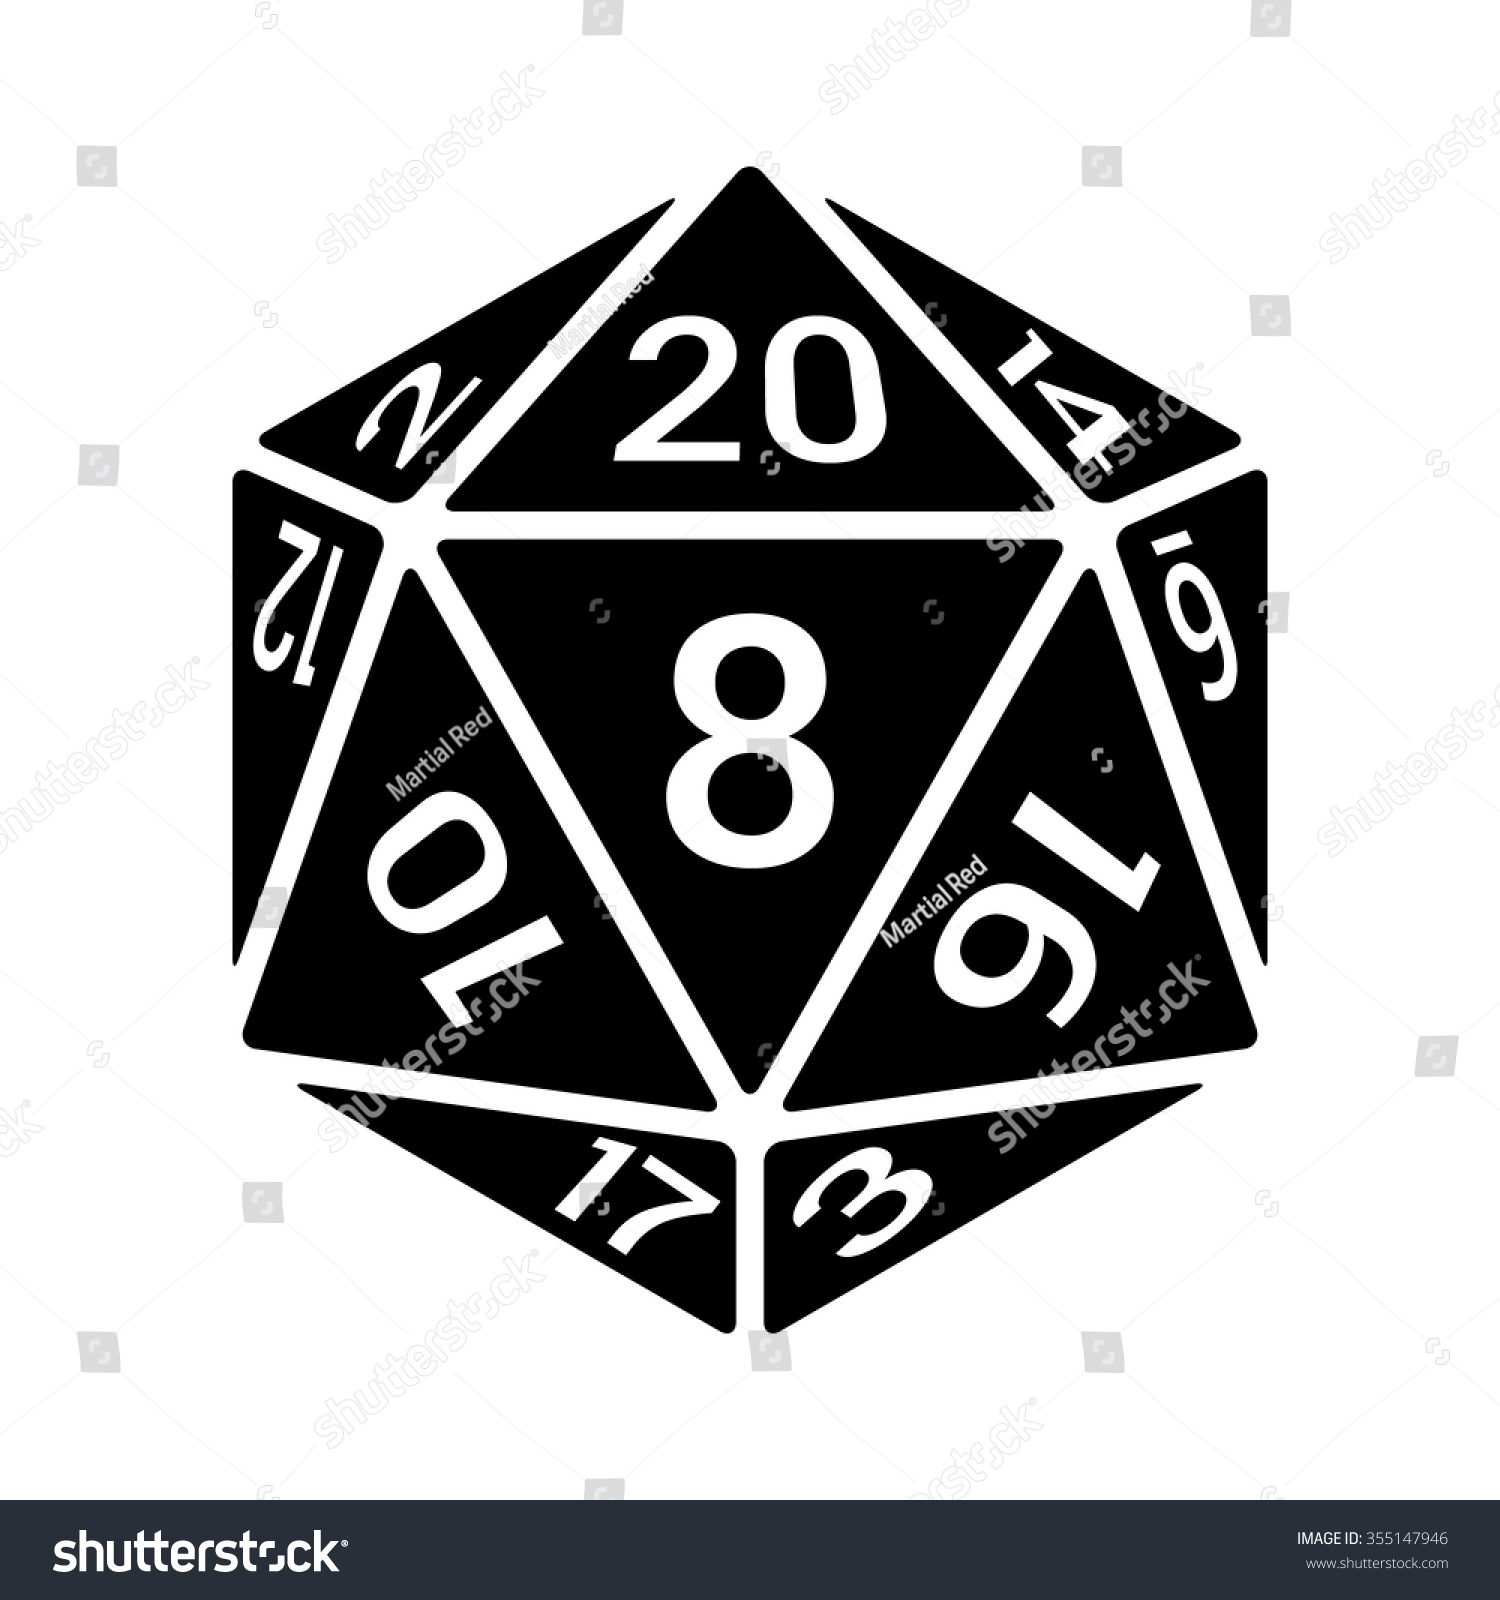 SVG of 20 sided / 20d dice with numbers flat vector icon for apps and websites svg